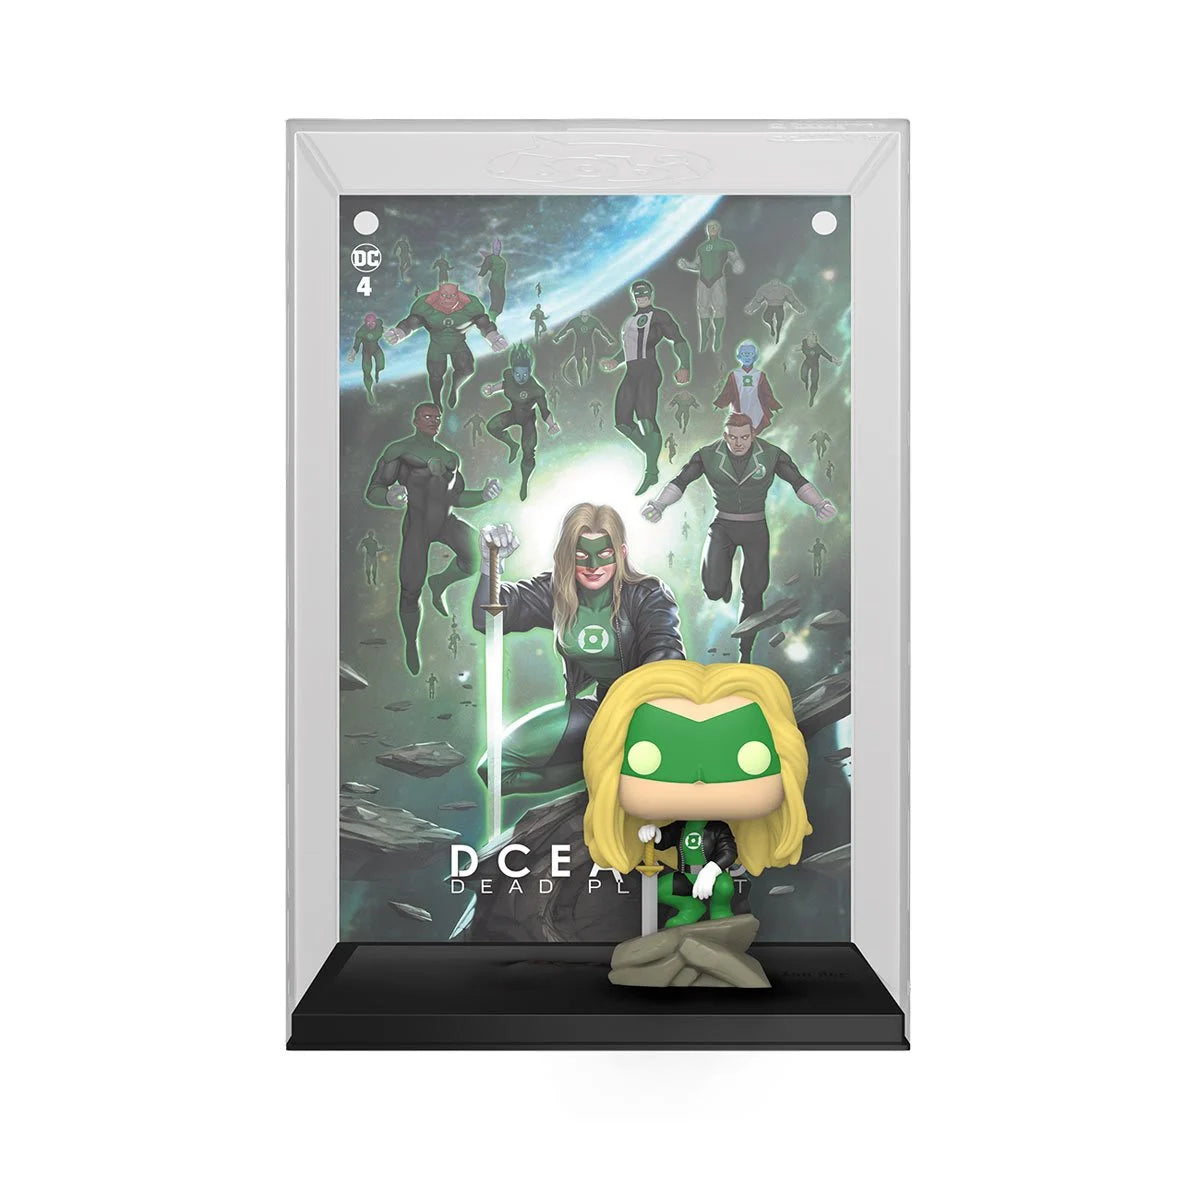 Green Lantern DCeased Pop! Comic Cover Figure with Case